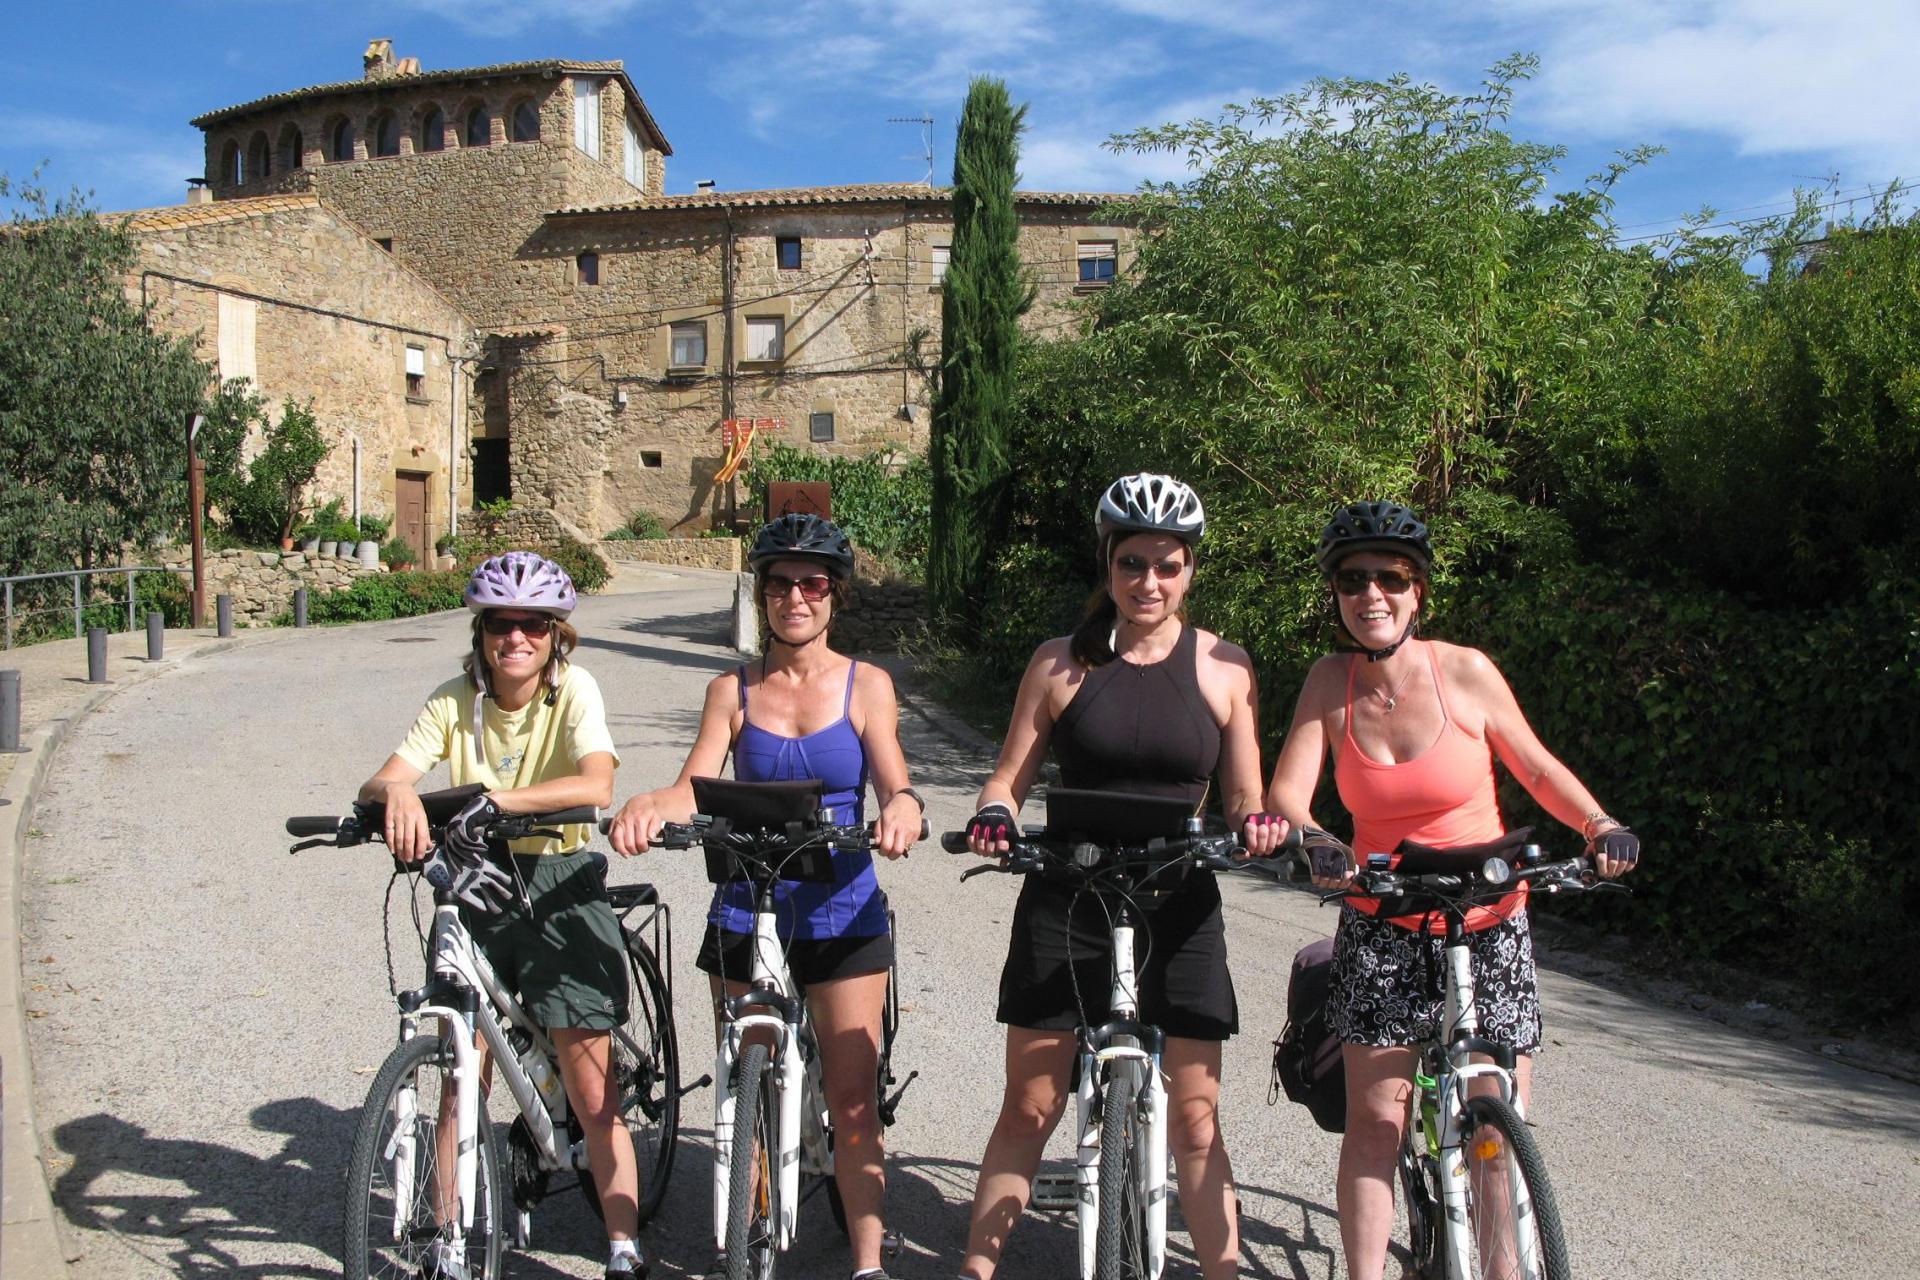 A group of cyclists on a tour stand in the foreground with medieval Spanish architecture in the background